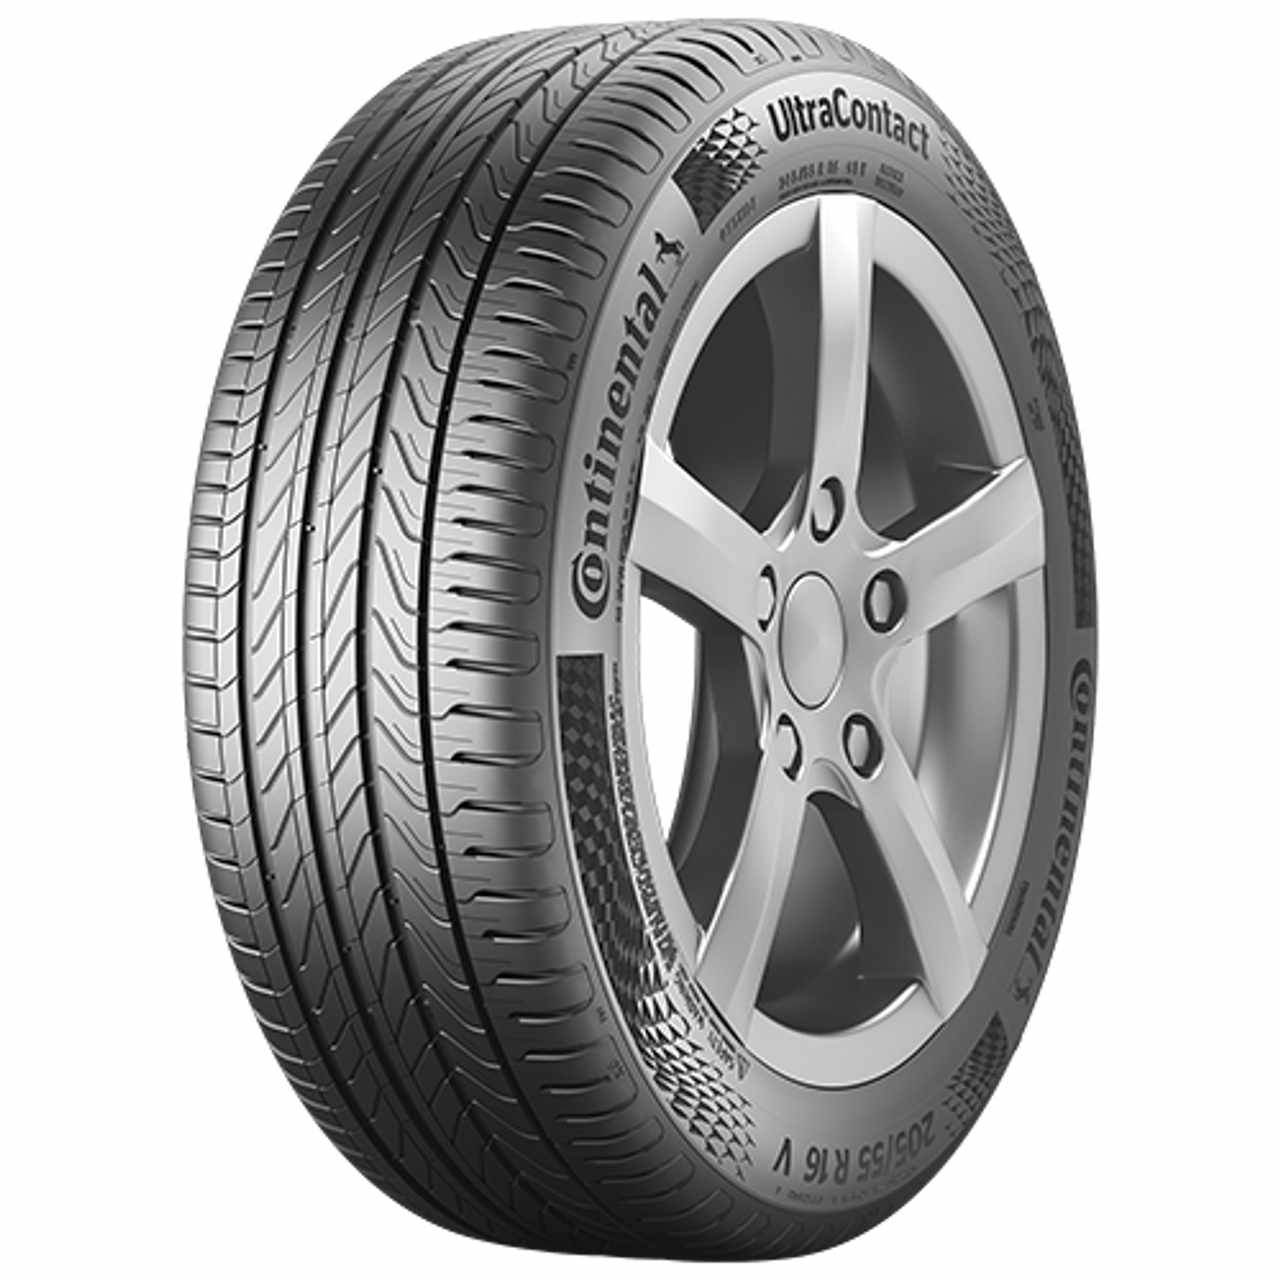 CONTINENTAL ULTRACONTACT (EVc) 185/60R15 84H BSW